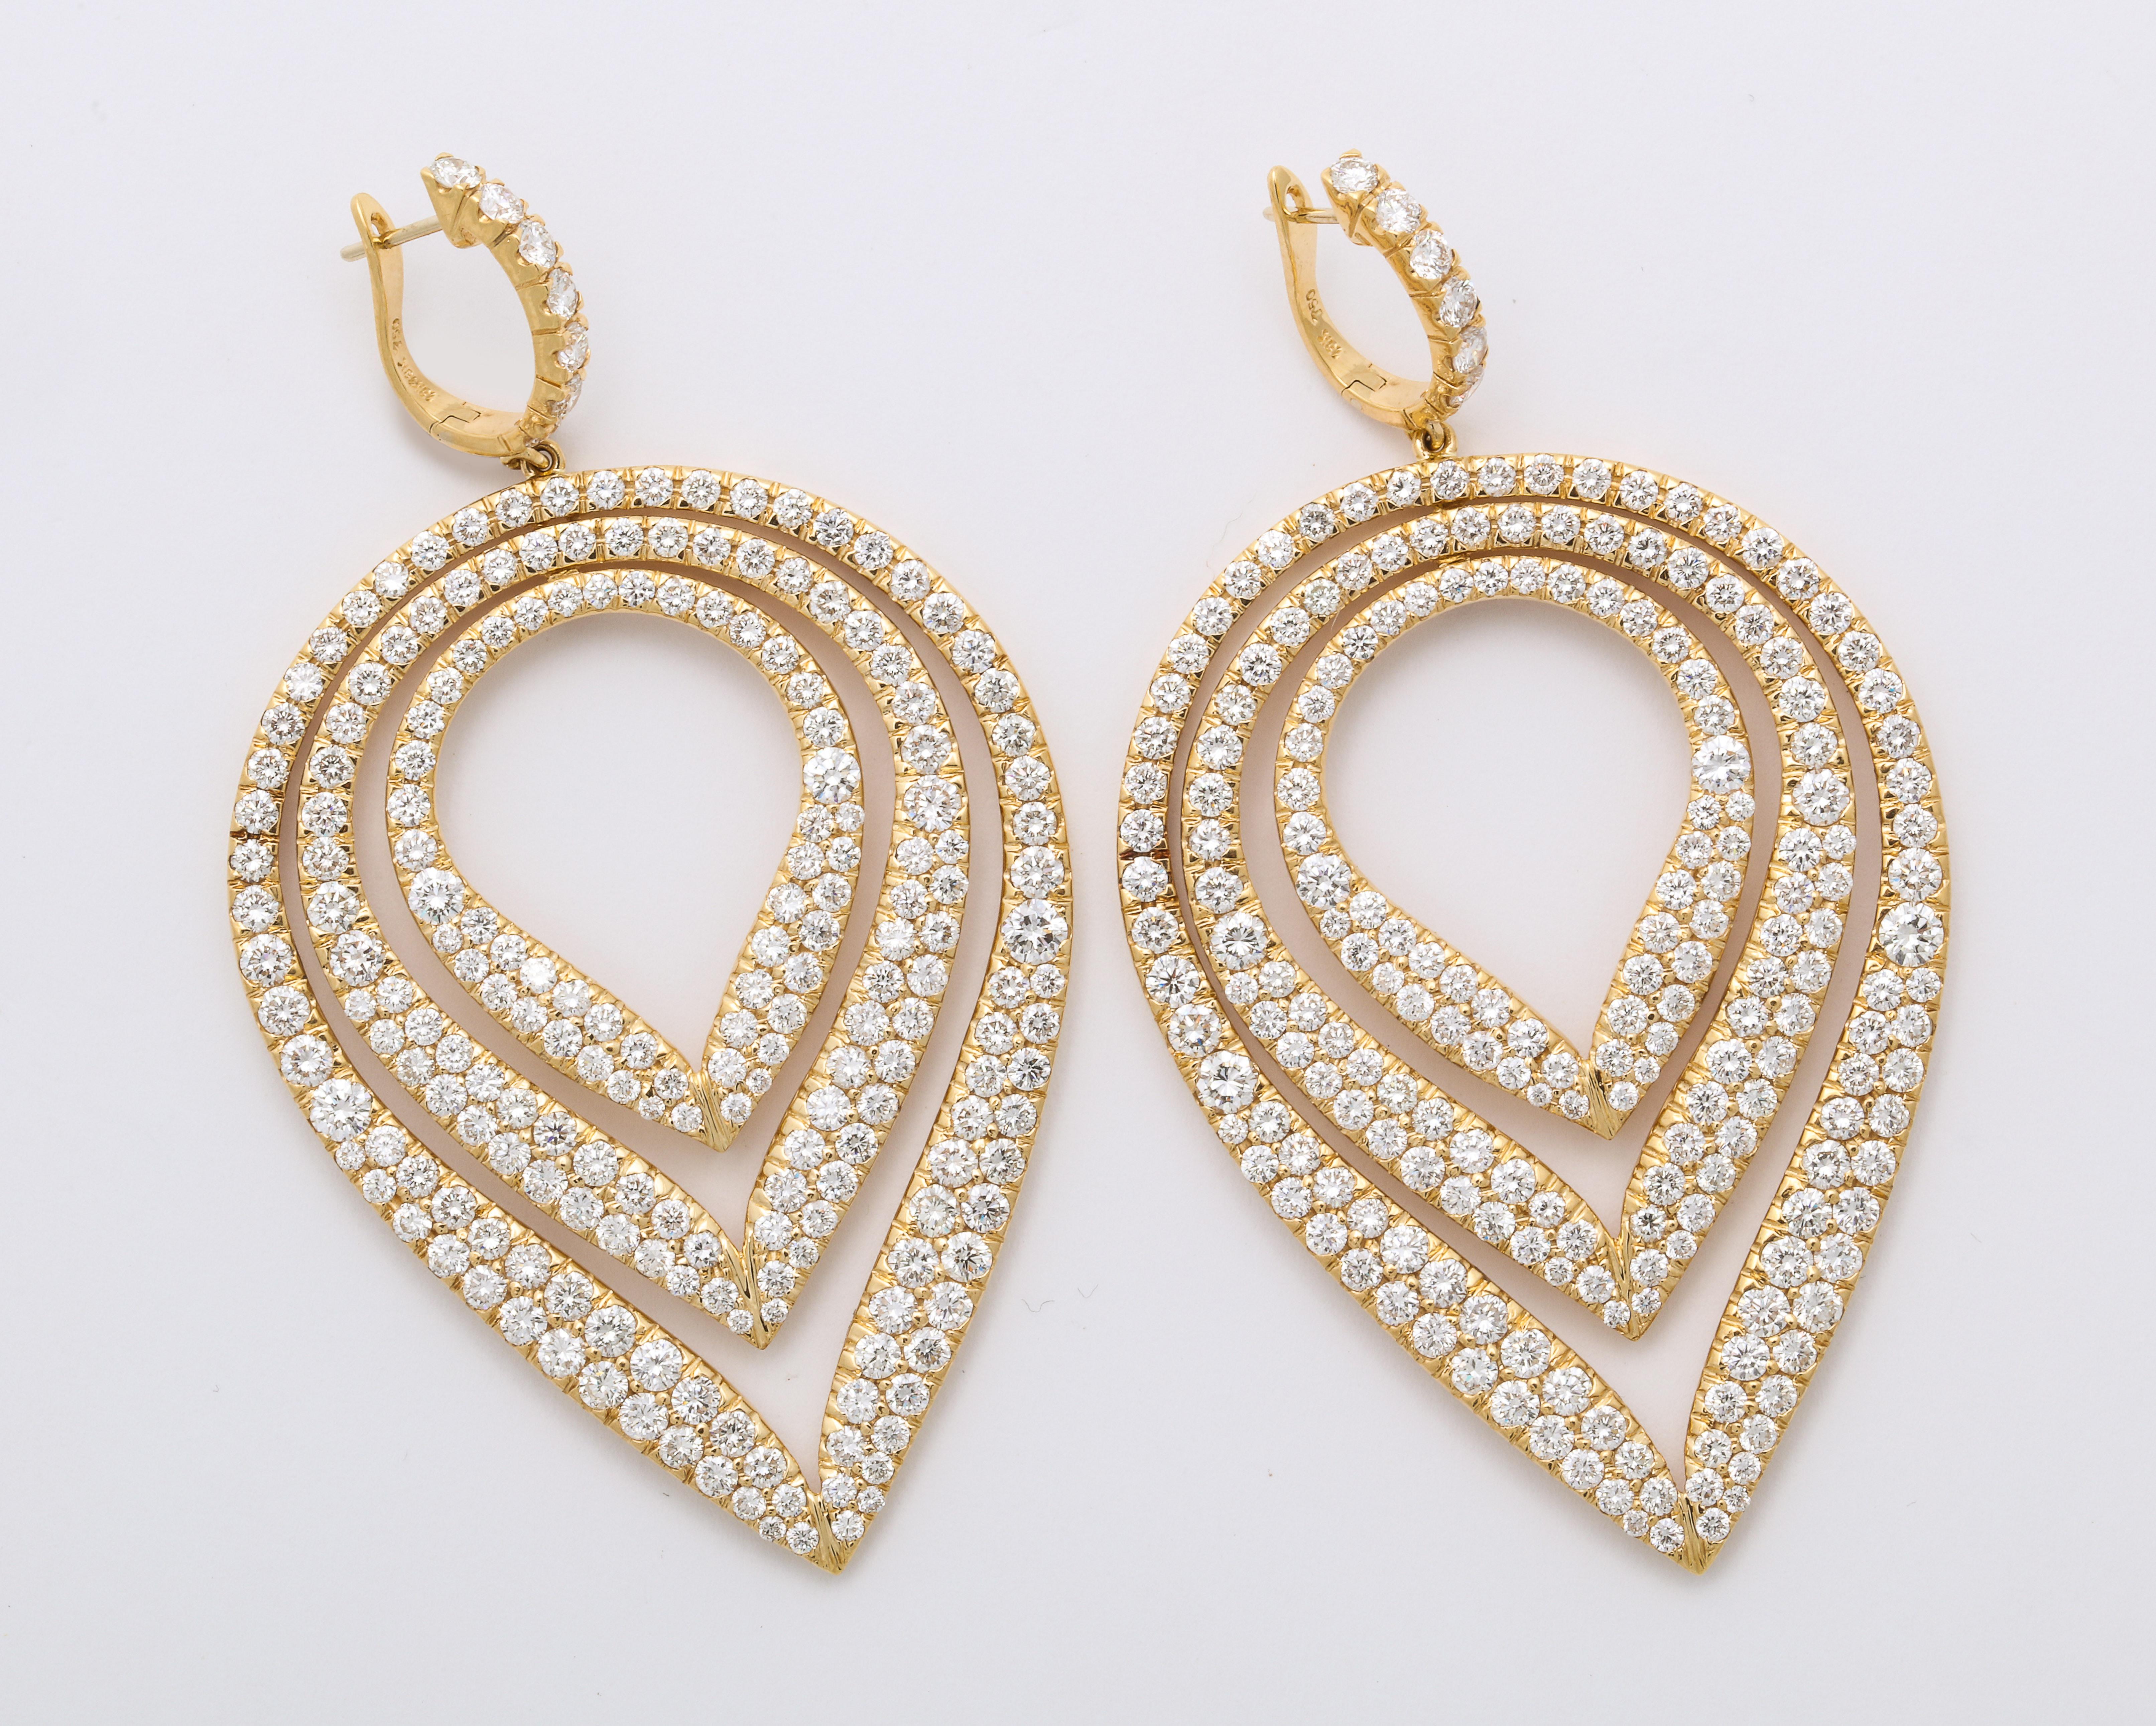 Dazzling 18K yellow gold semi-hoop earrings suspending articulating inverted concentric pear-shape pendants decorated entirely with colorless pave'-set round brilliant-cut diamonds: 14.78 carats.
Earrings are fitted with posts for pierced ears